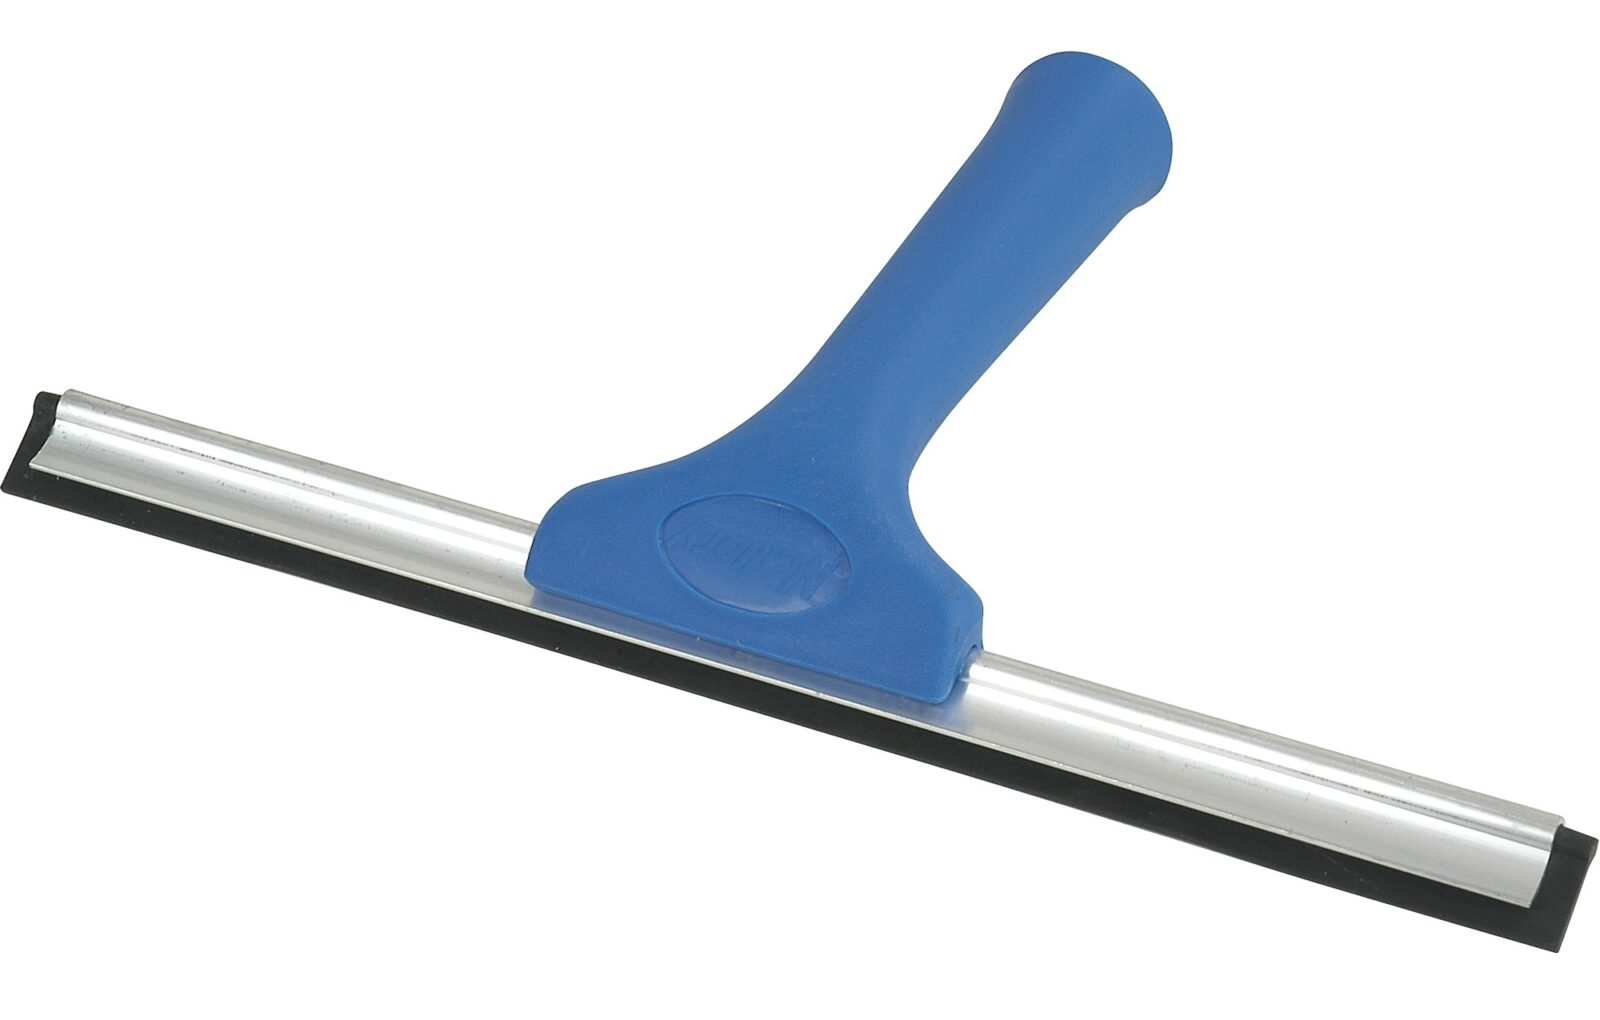 squeegee for cleaning windows